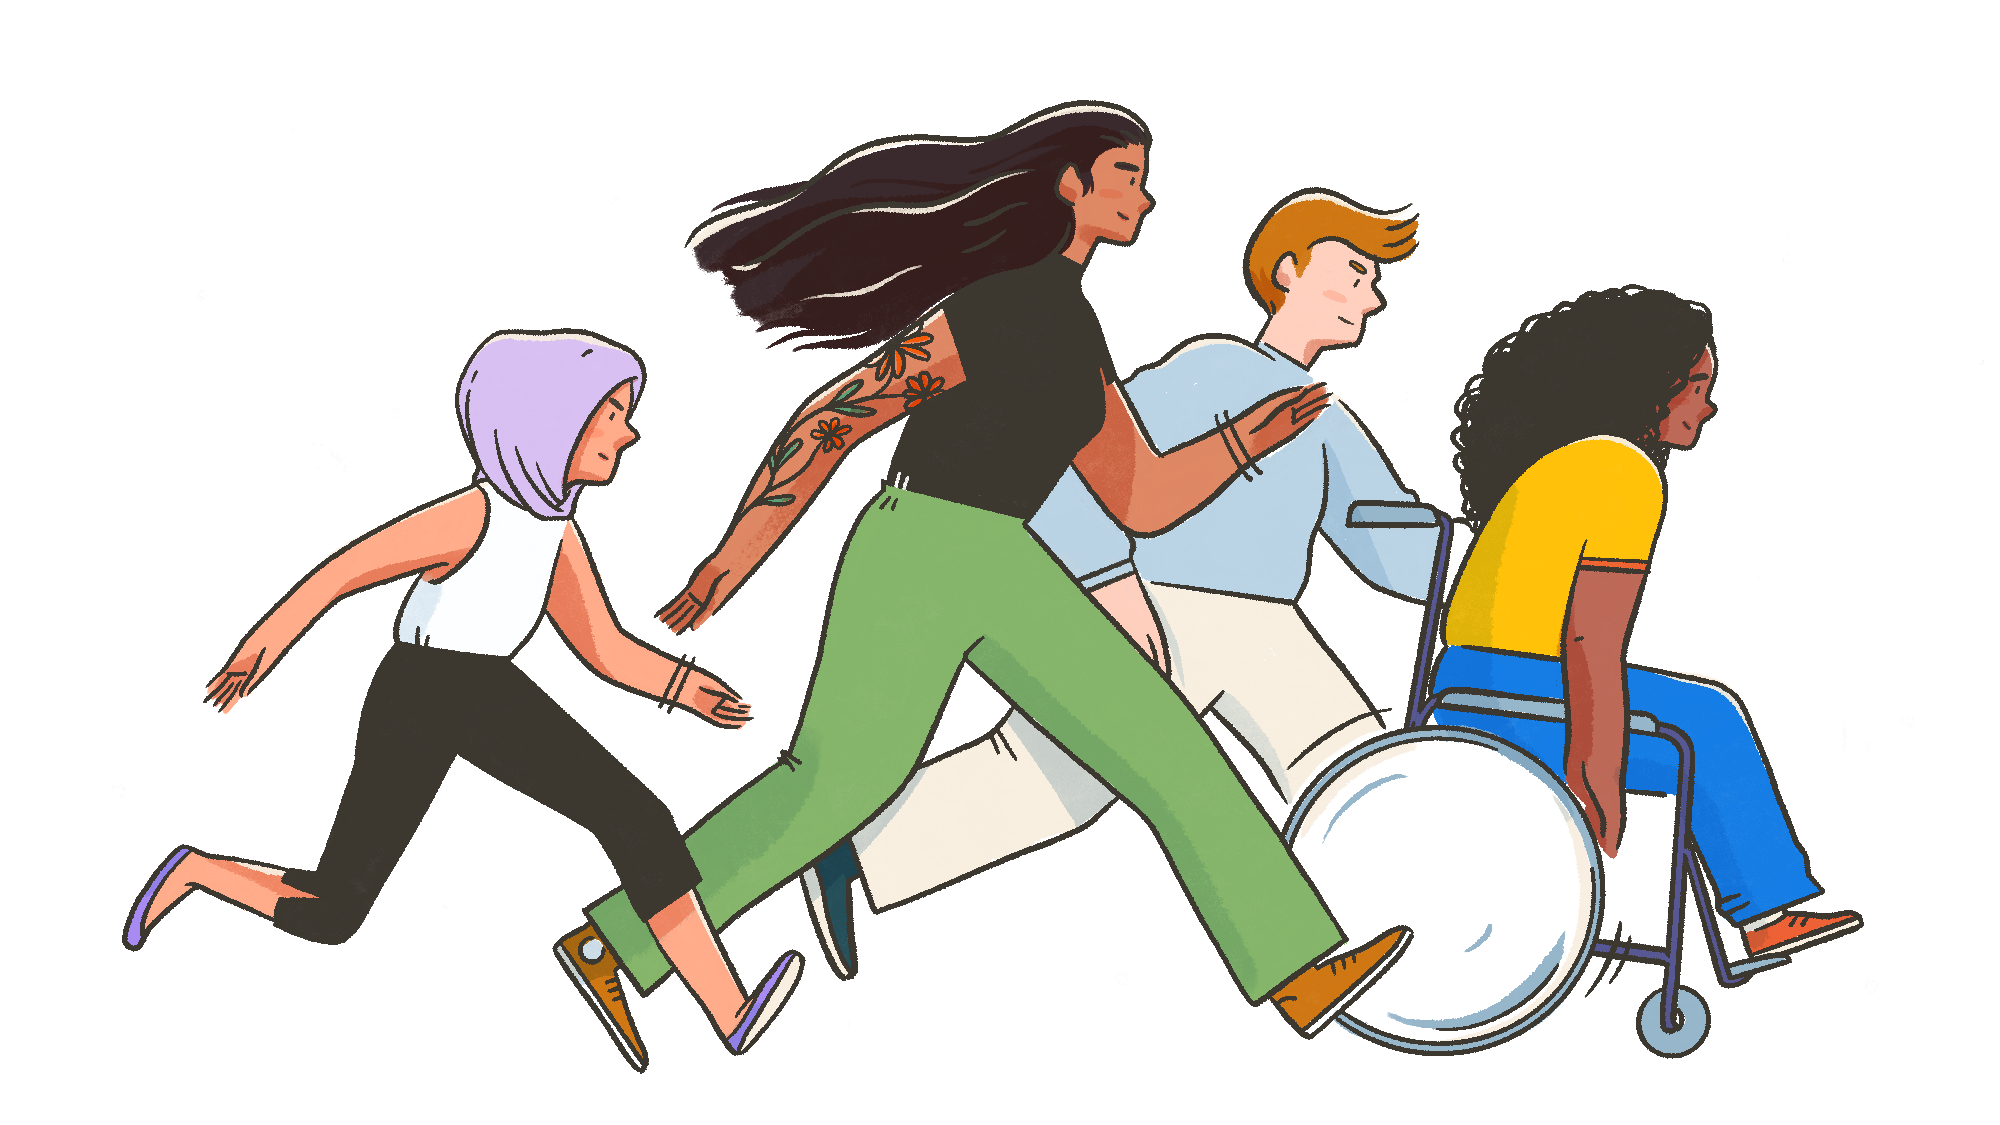 An illustration of a multiracial group of four people moving toward the right side of the frame.